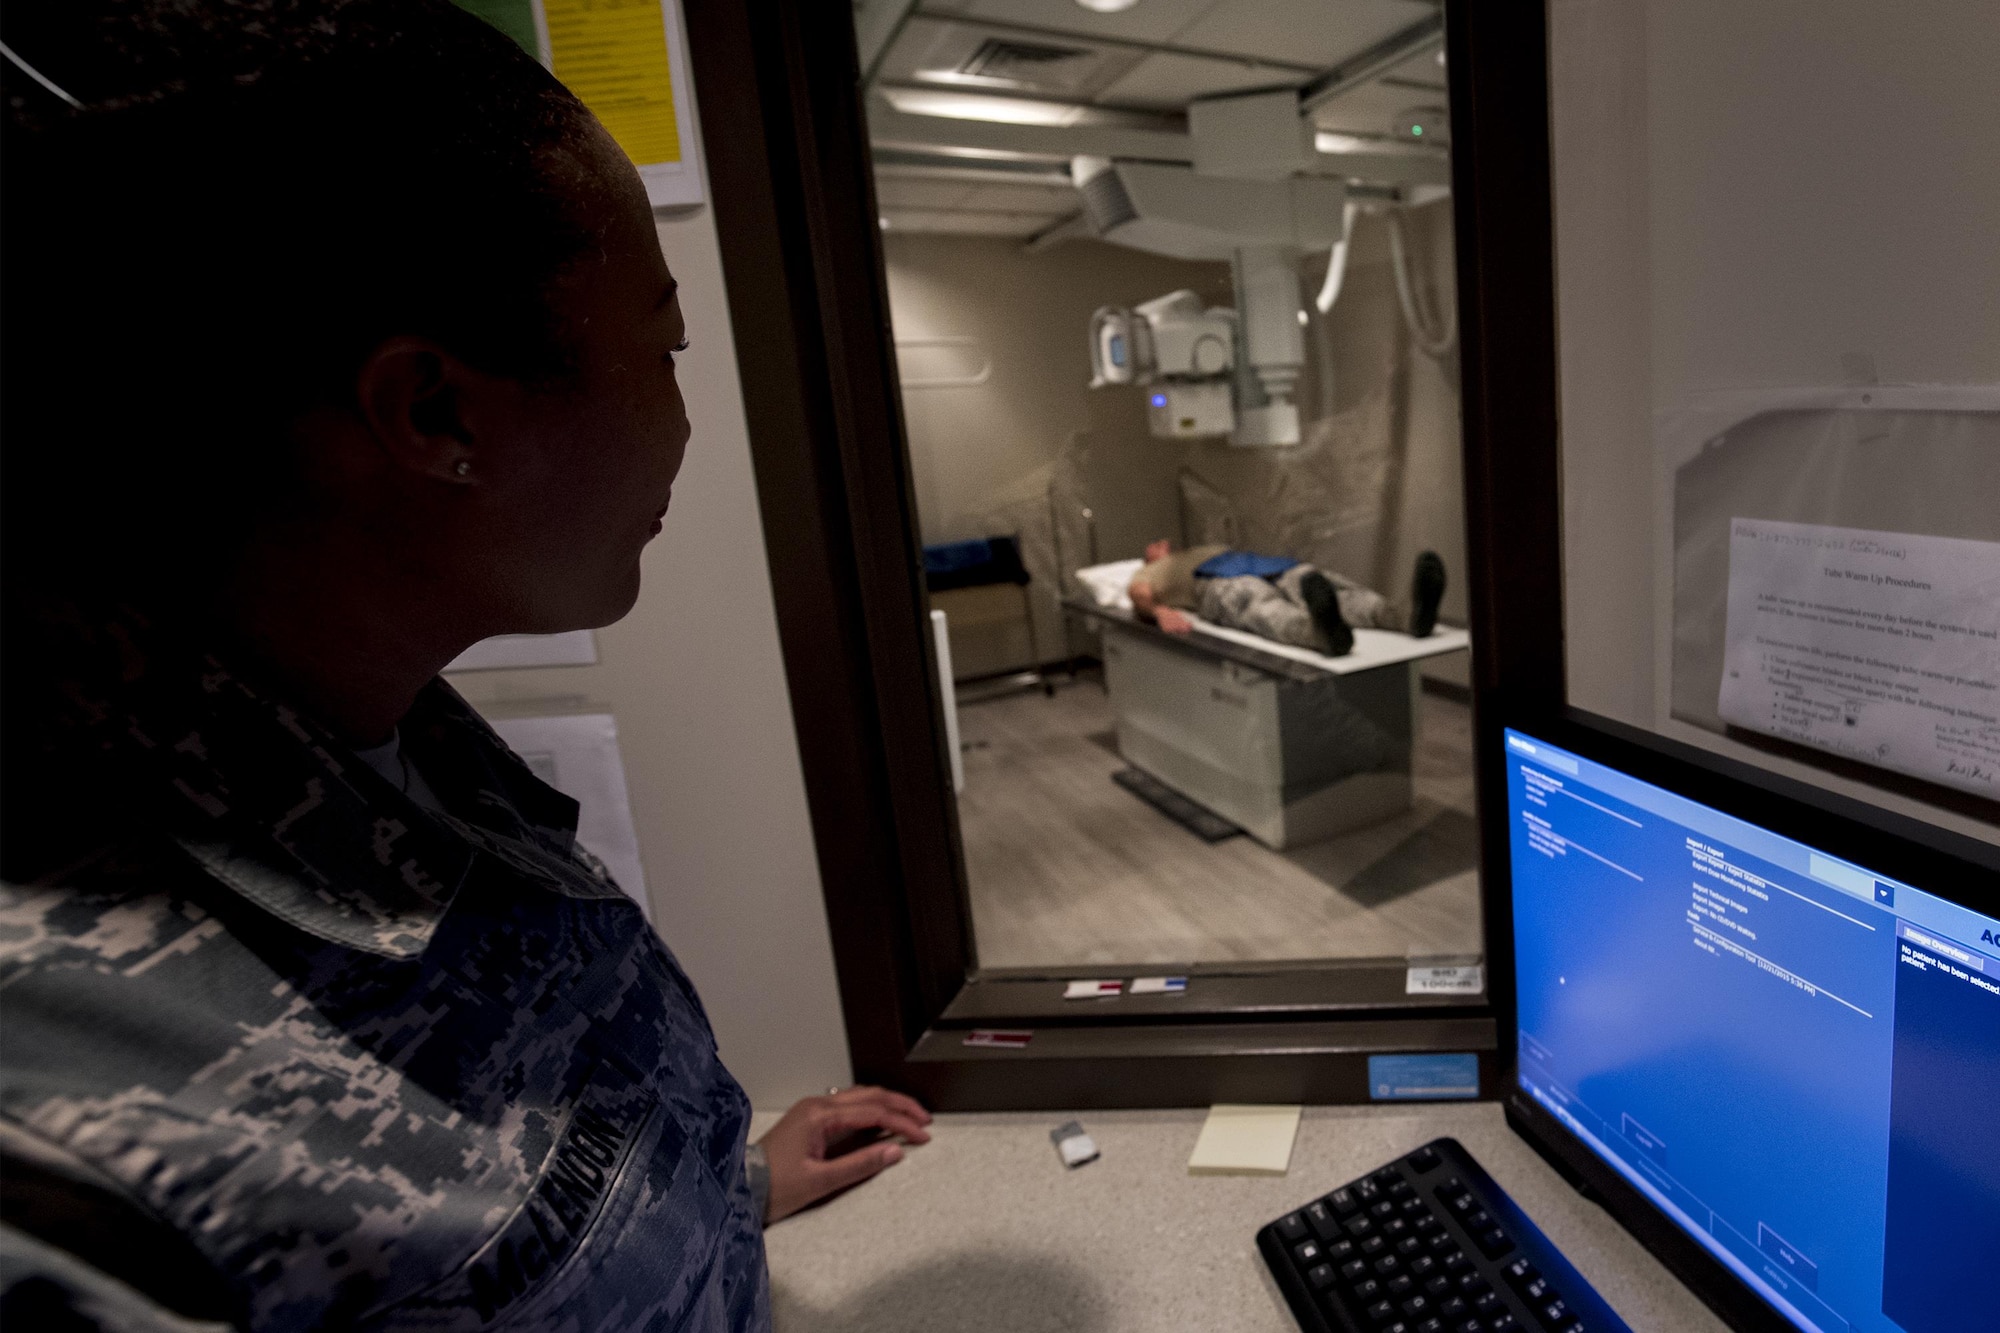 Master Sgt. Tracey McLendon, 23d Medical Support Squadron flight chief of diagnostic imaging, performs an X-ray on Senior Airman Jeffrey Nelligan, 355th Medical Support Squadron diagnostic imagining technologist, Oct. 24, 2016, at Moody Air Force Base, Ga. New technologies have allowed for Moody’s X-rays to be processed and seen more quickly. (U.S. Air Force photo by Airman 1st Class Daniel Snider)